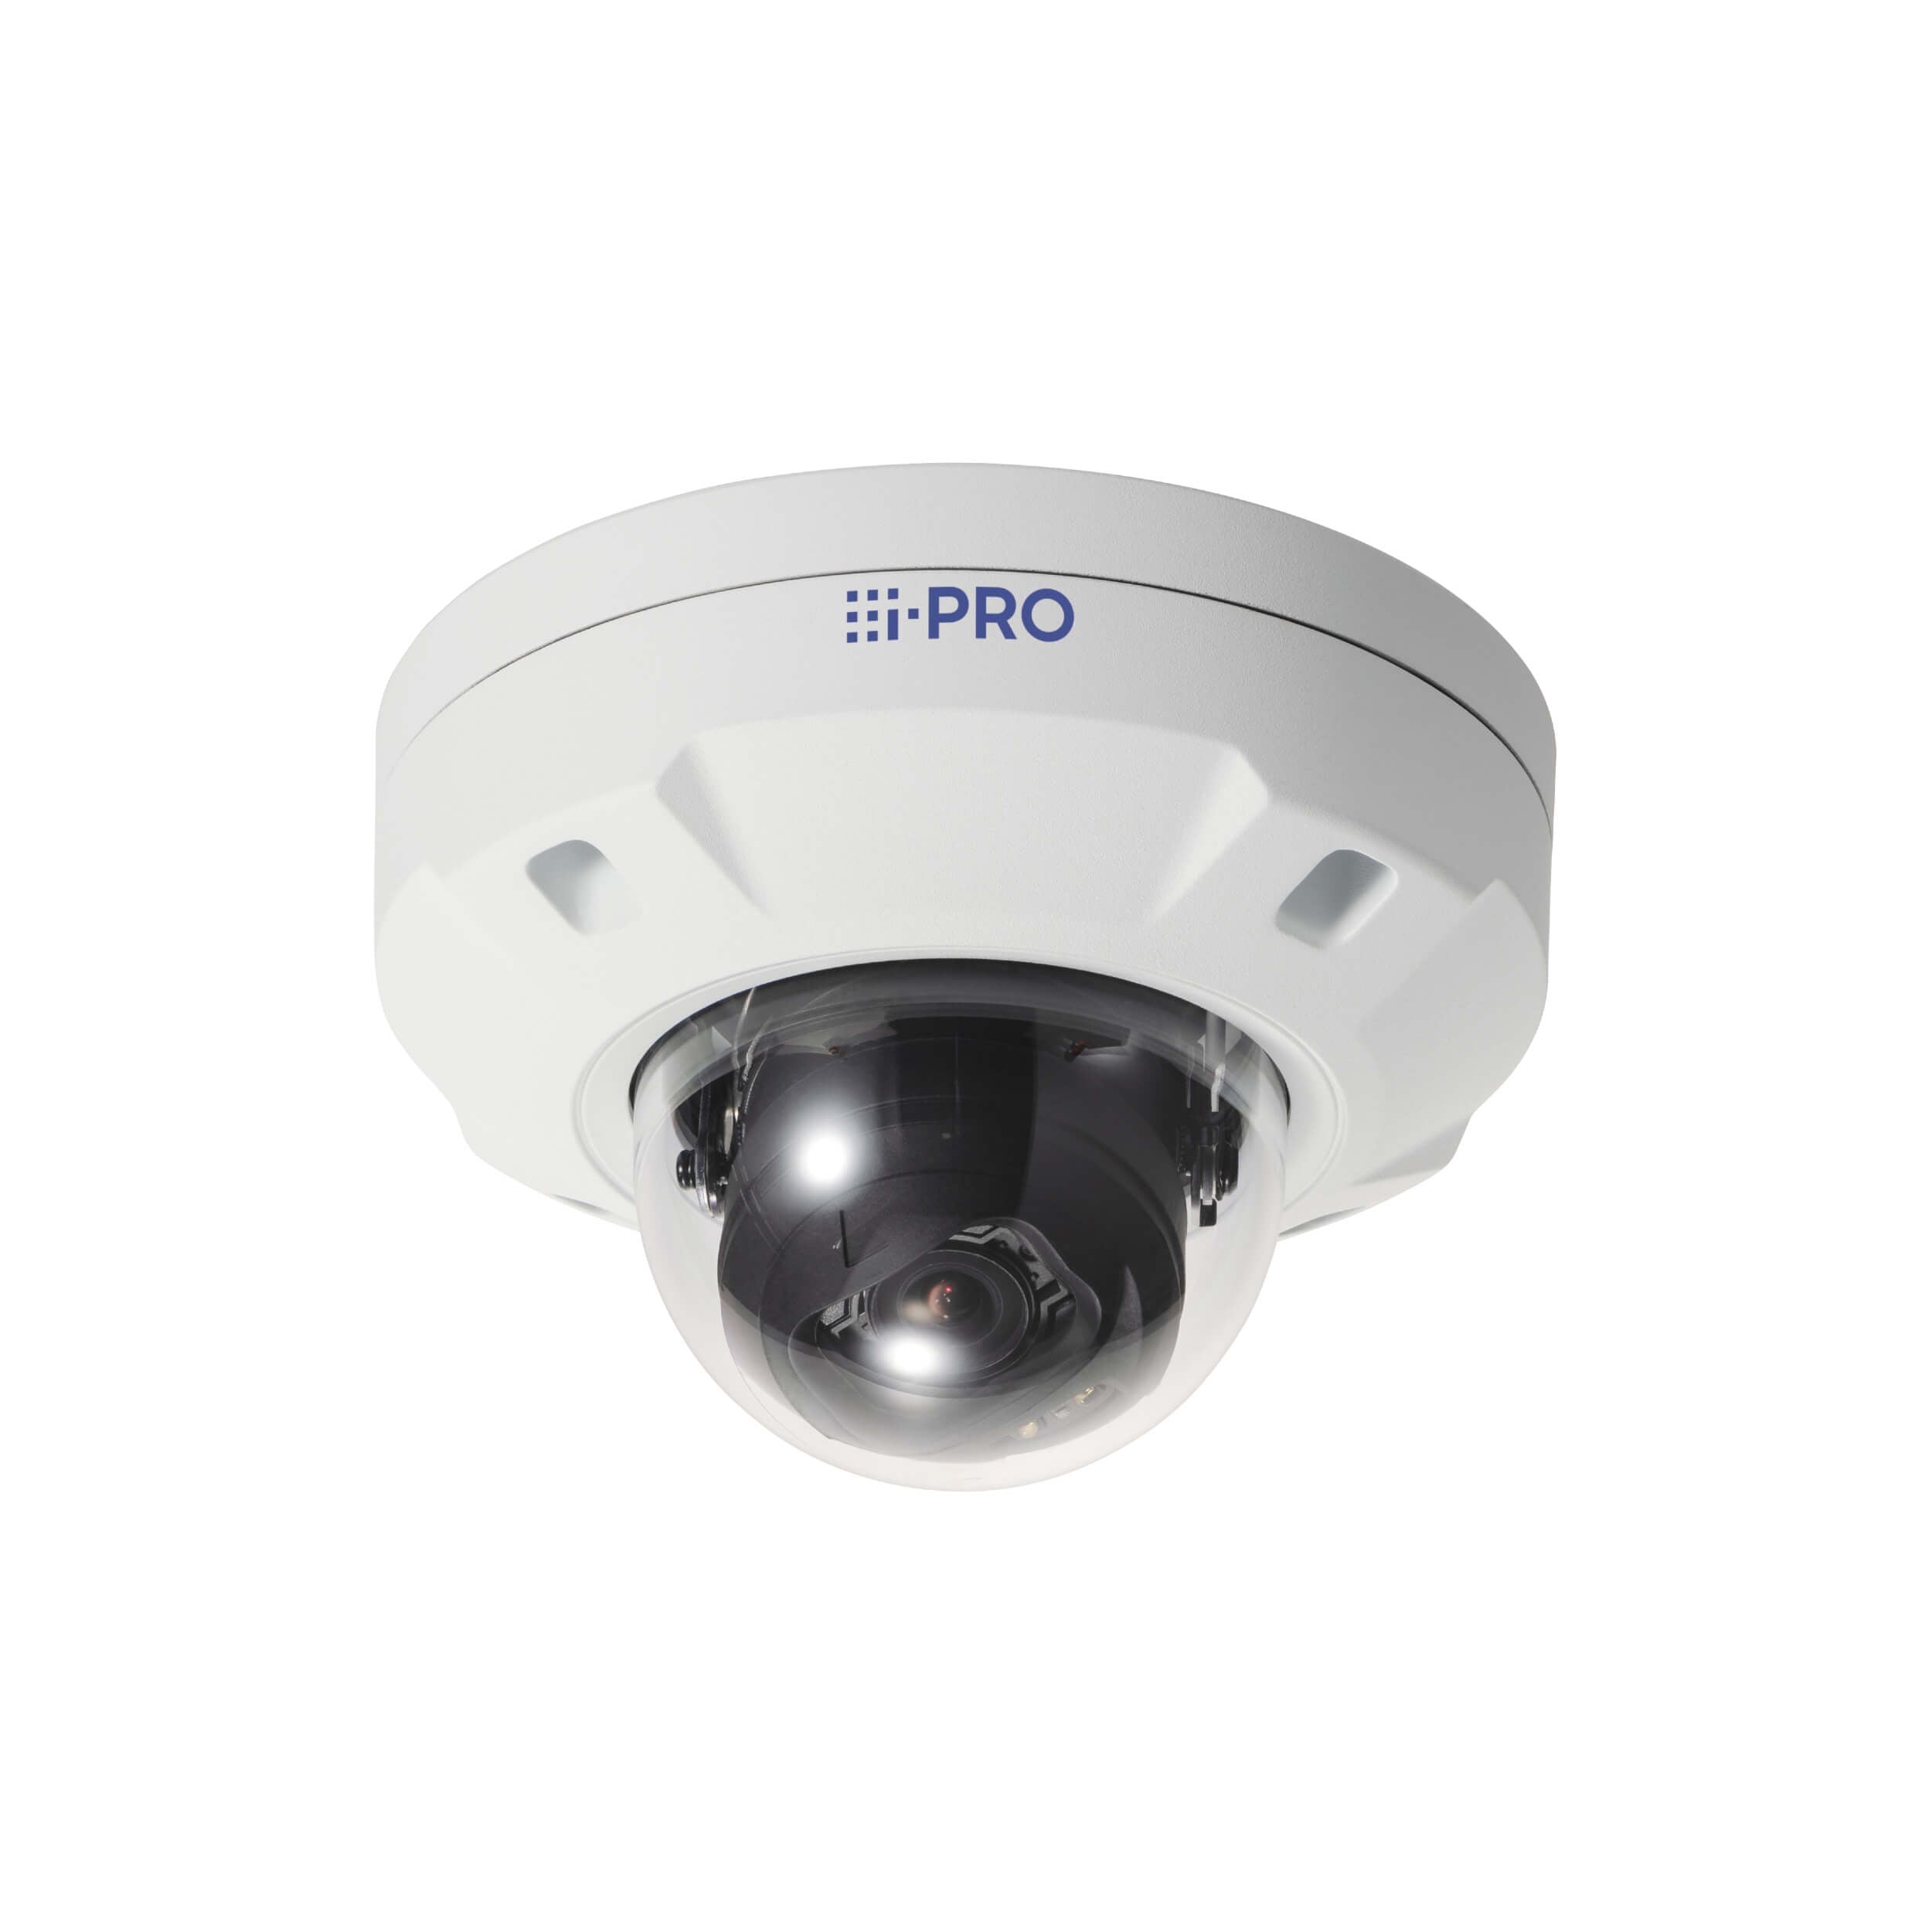 Panasonic WV-S25500-V3LG 5MP Vandal Resistant Outdoor Dome Network Camera, Smoke Dome with AI Engine with 2.9-9mm Lens